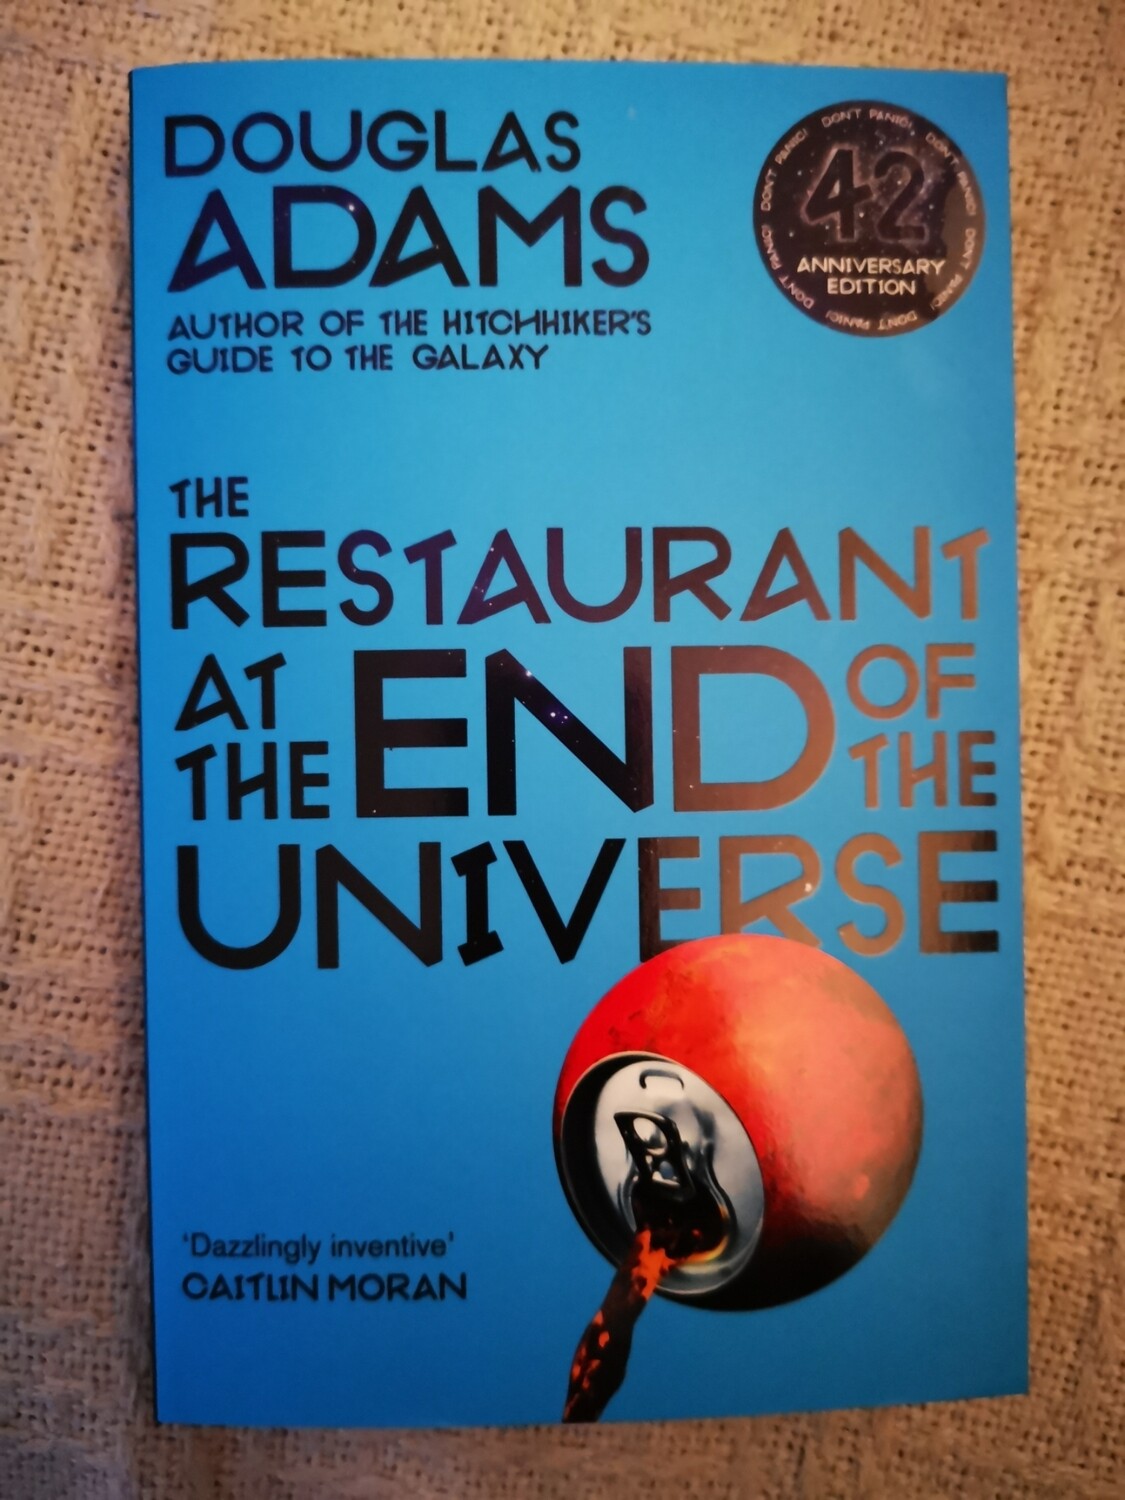 The restaurant at the end of the universe, Douglas Adams